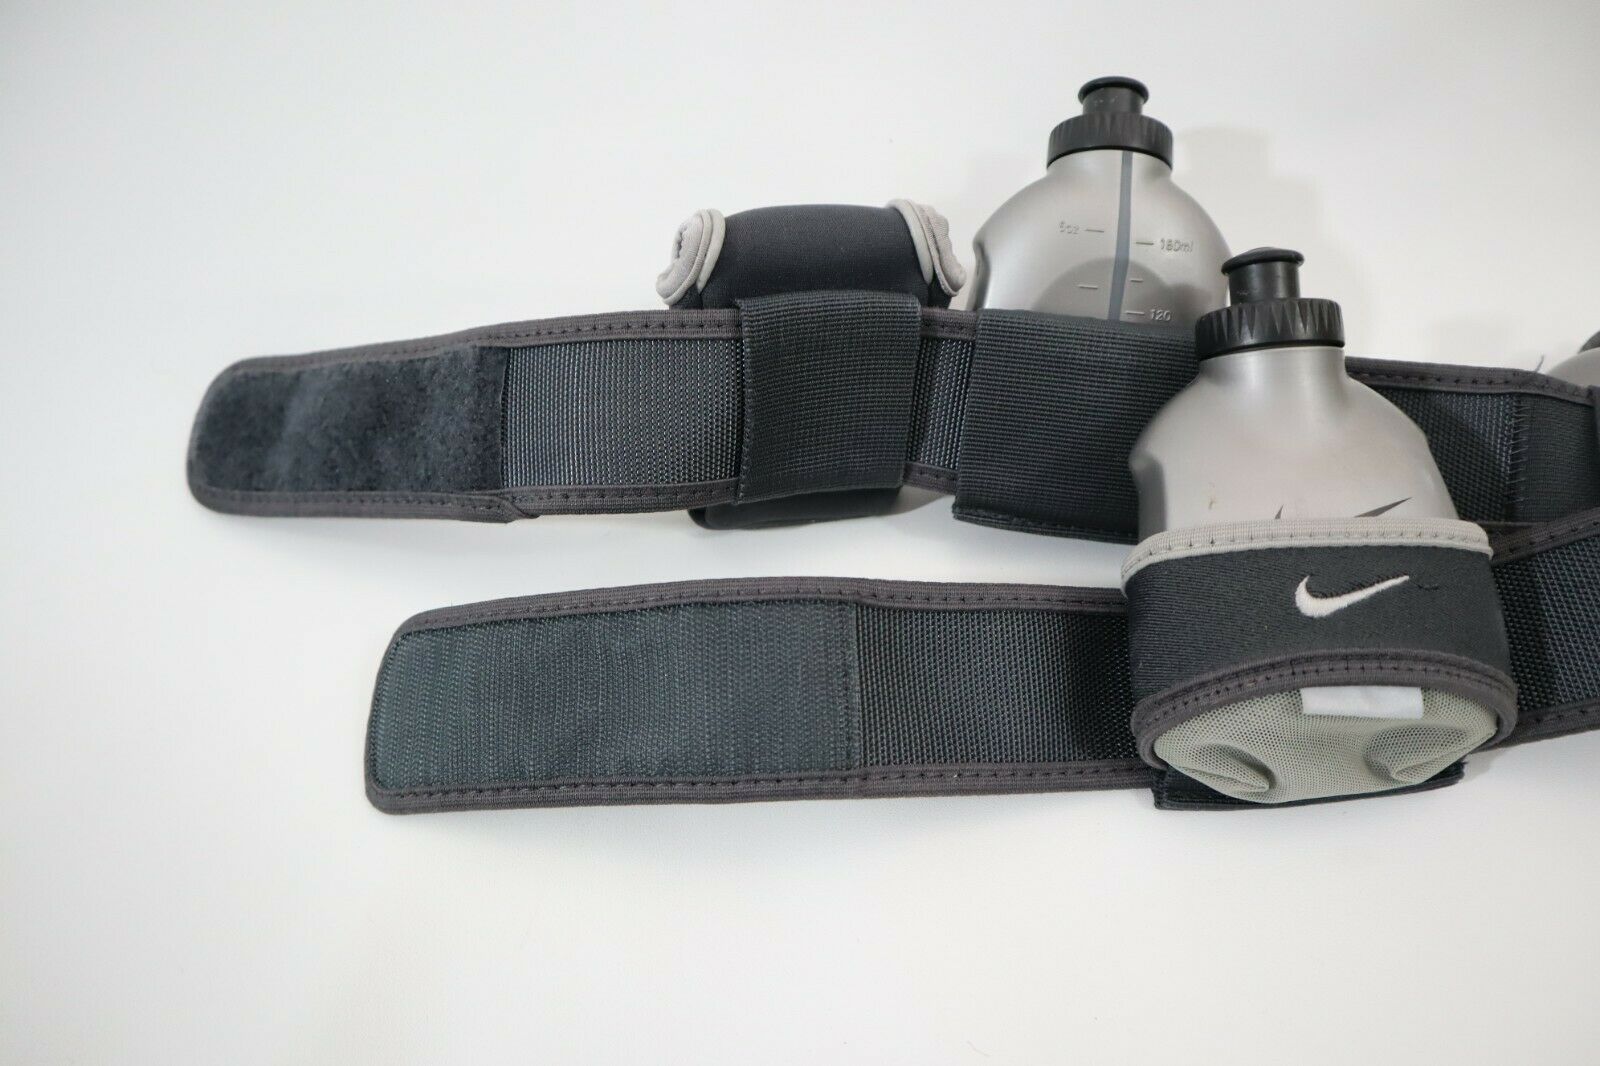 Nike Lightweight Running Hydration Belt With 3 Bottles and Secure Pocket